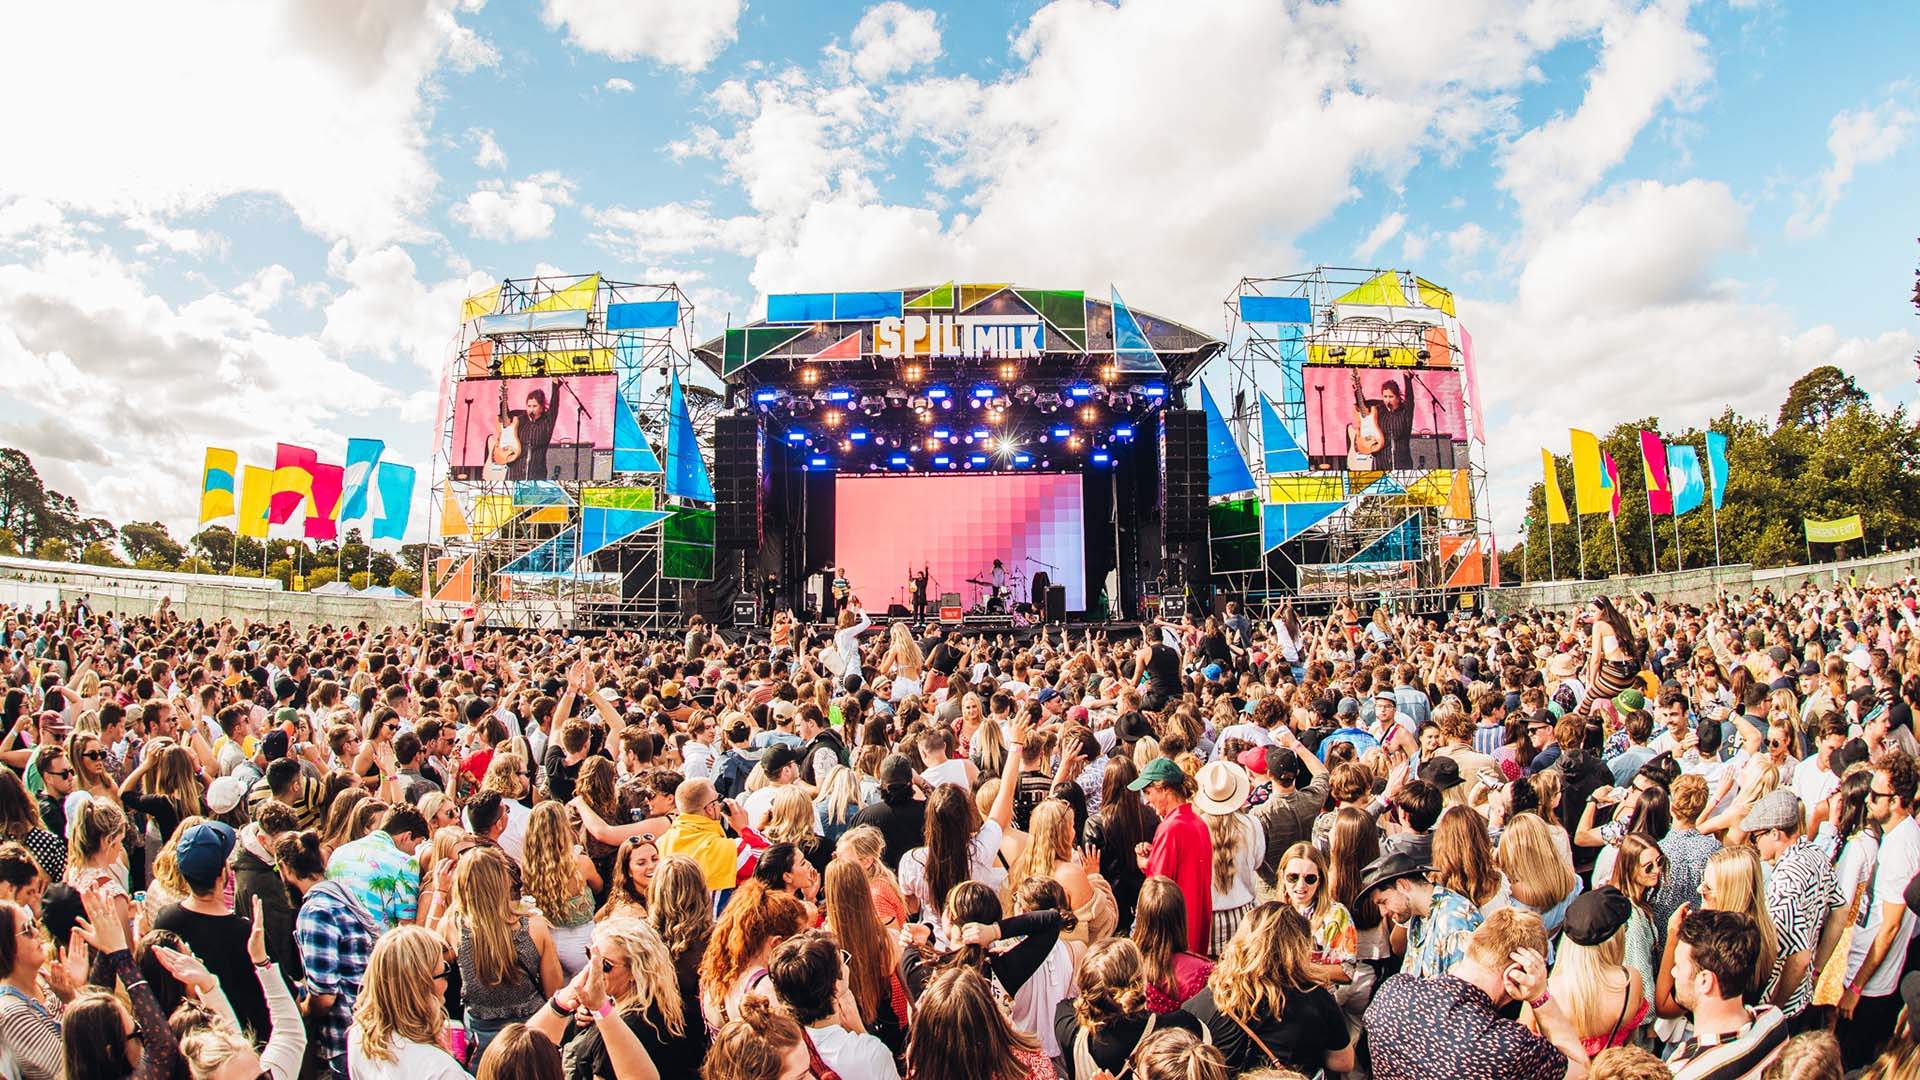 Flume, Stormzy and The Wombats Lead Spilt Milk's Packed 2022 Lineup